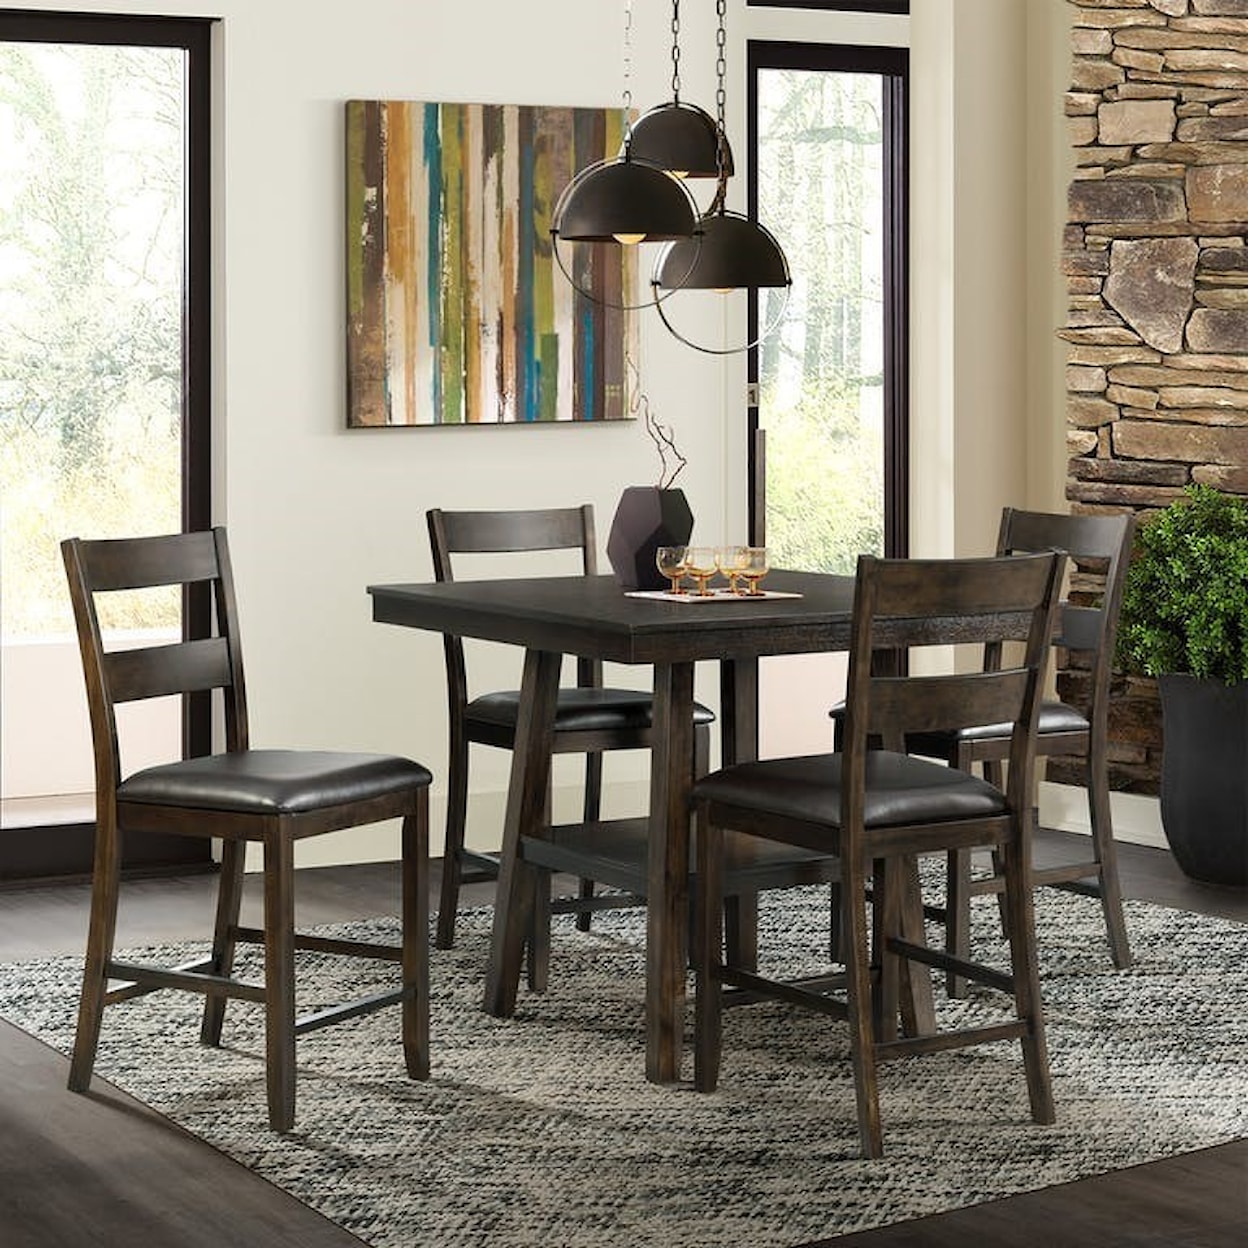 Elements Laredo 5 Piece Counter Height Dining Set